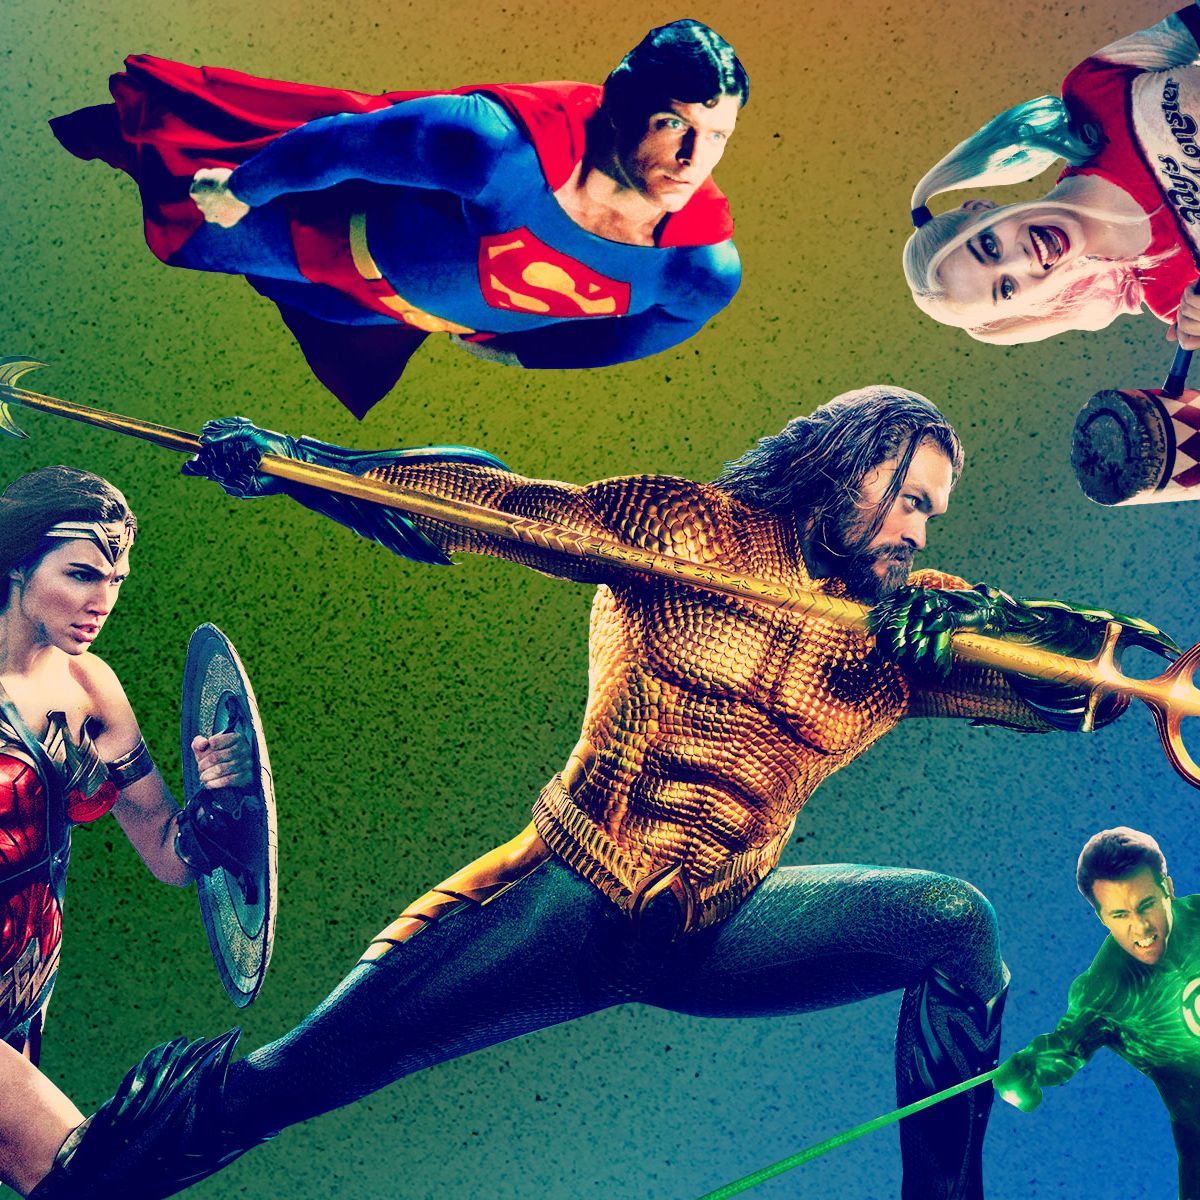 The Best DC Comics Movies, Ranked: From 'Batman' to 'Joker'